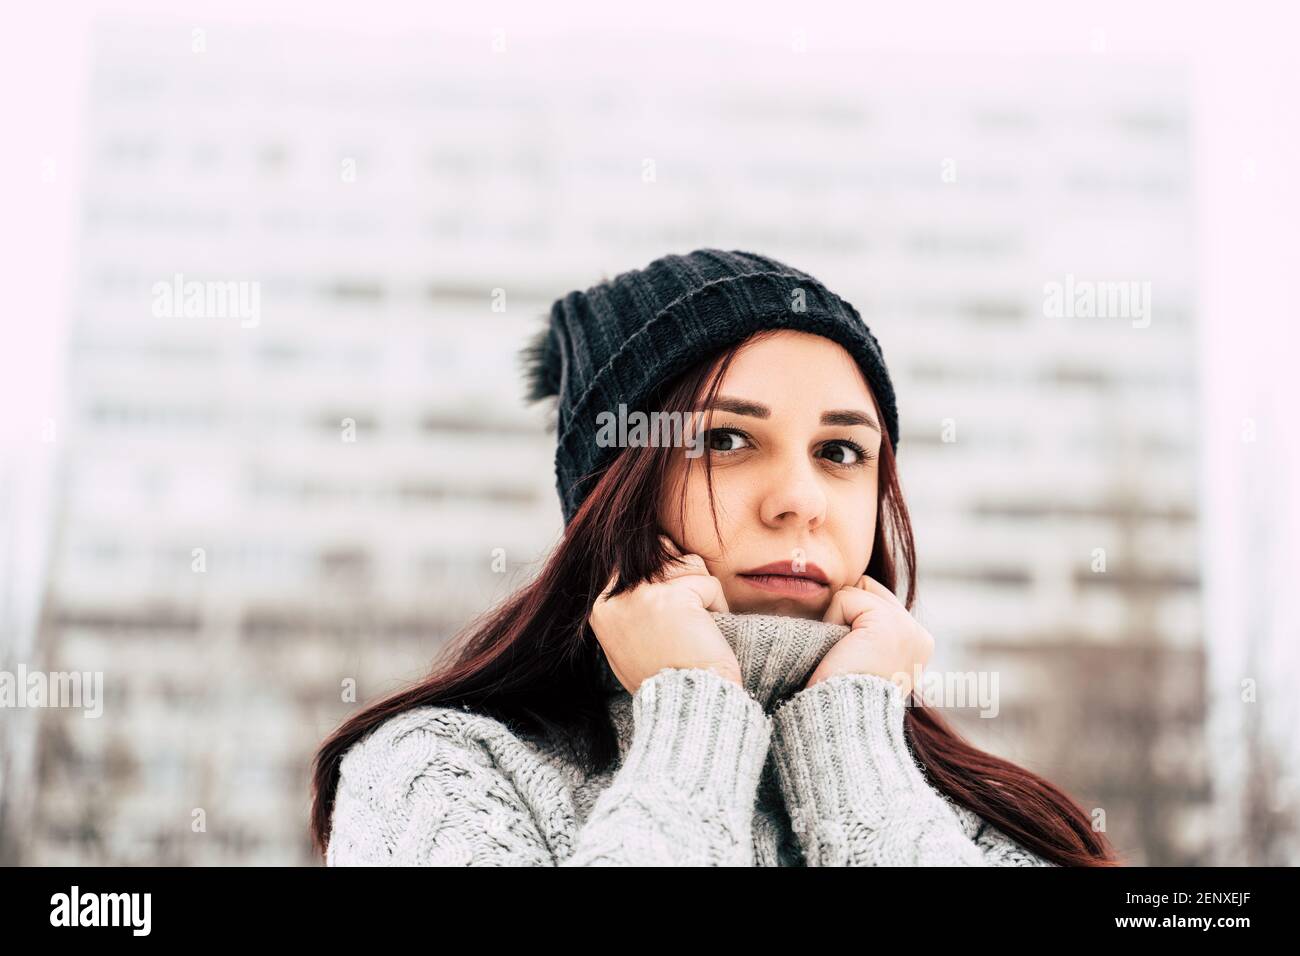 A pretty girl, dressed in a gray knitted sweater and a hat, covers her face with a sweater collar. Stock Photo